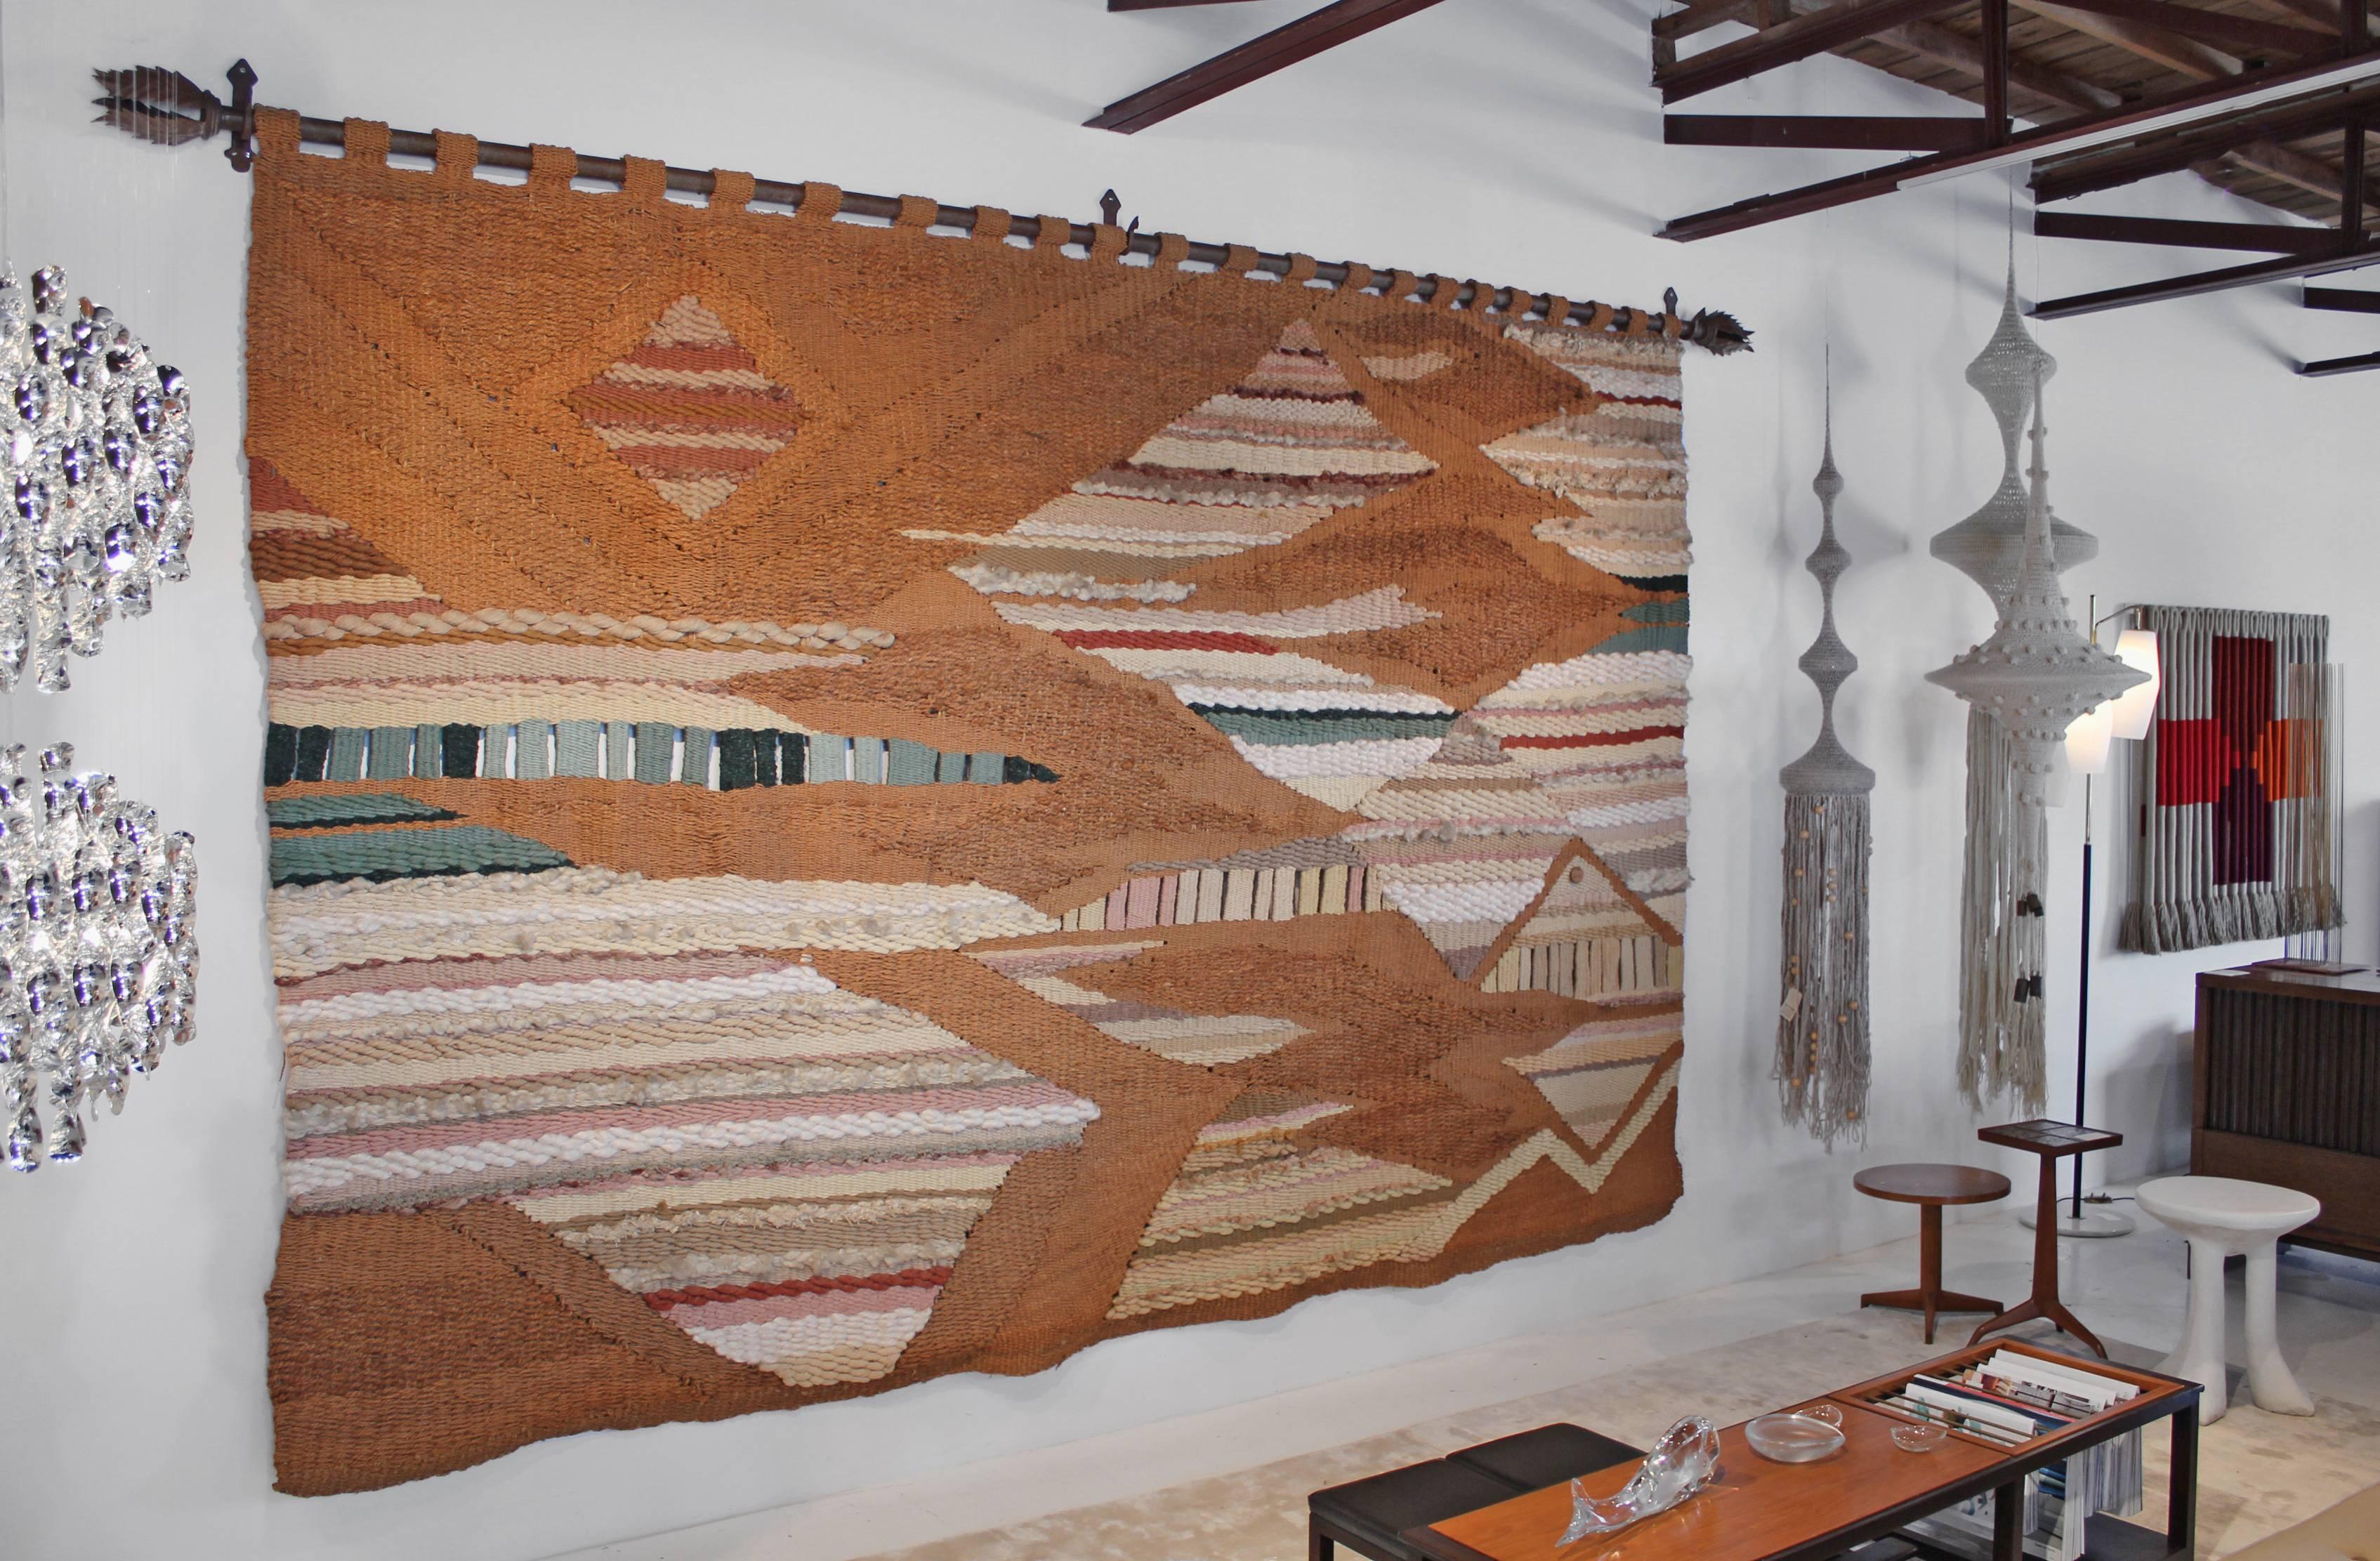 This massive raw fiber tapestry was woven by Romeo Reyna in the 1970s for a prominent family in Oklahoma. Romeo worked on the commission with the world-renowned interior designer Steve Chase. It has remained in the private collection of the family